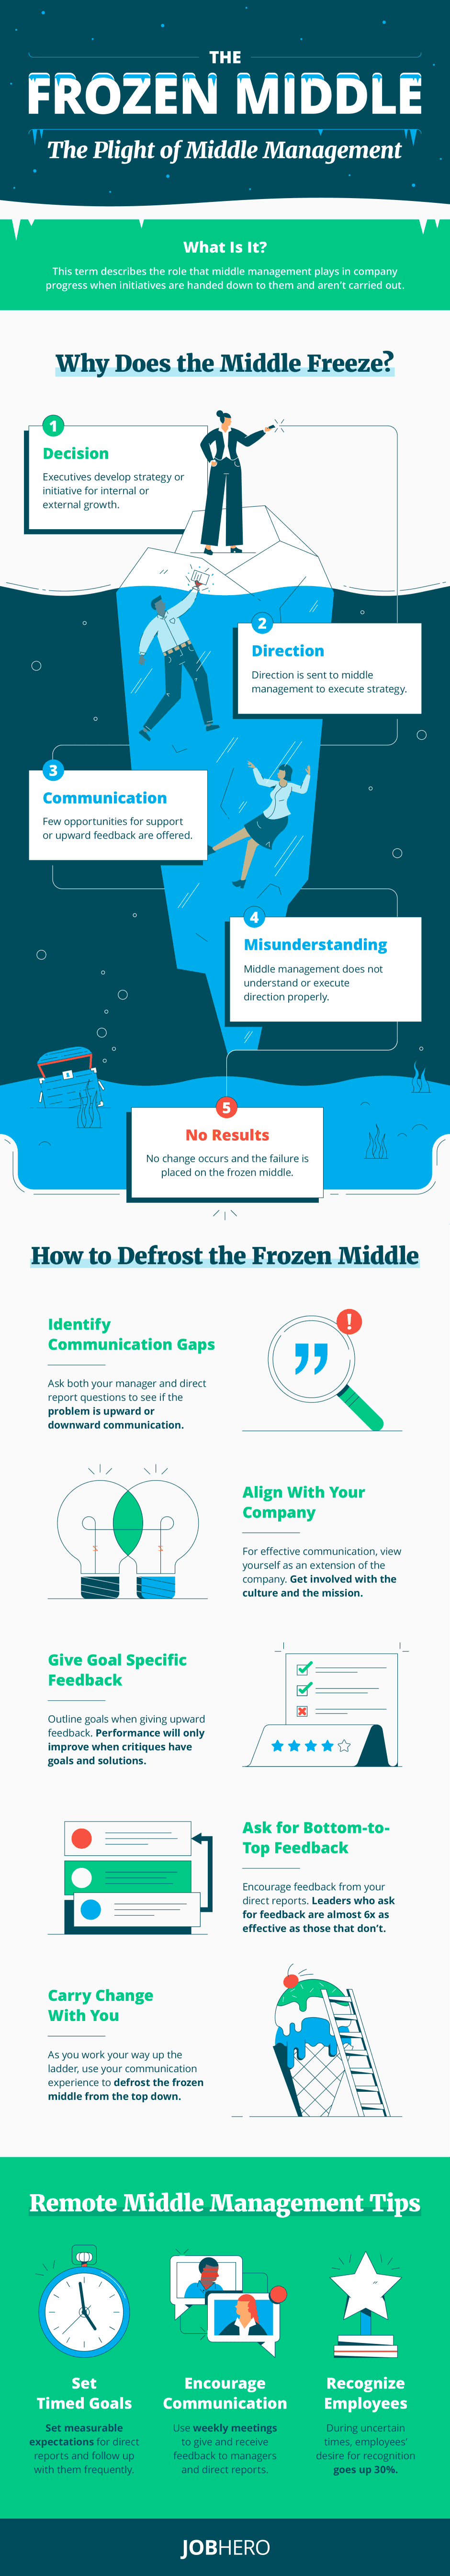 how to thaw the frozen middle.